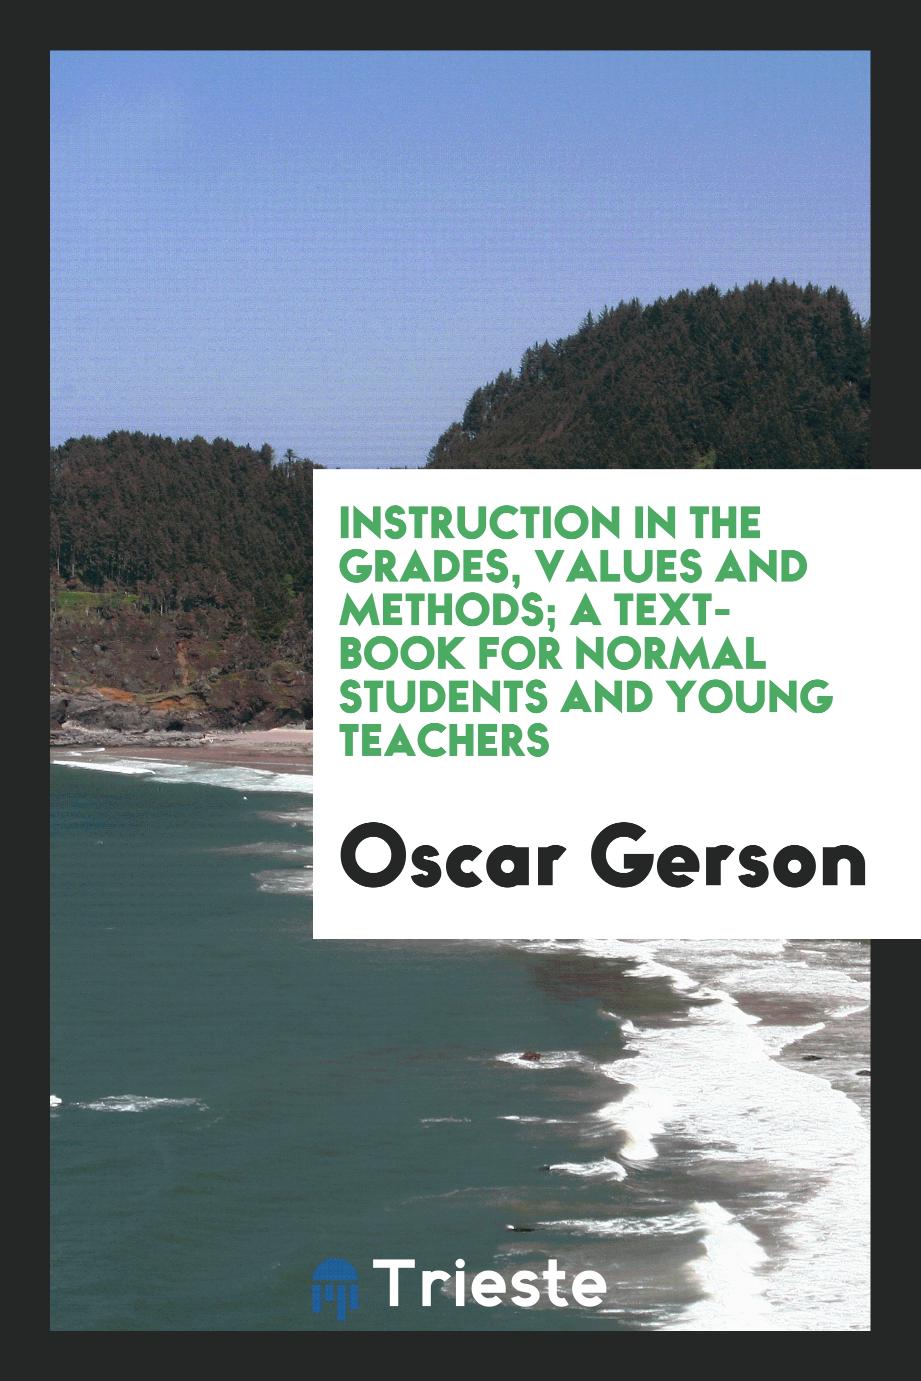 Instruction in the grades, values and methods; a text-book for normal students and young teachers